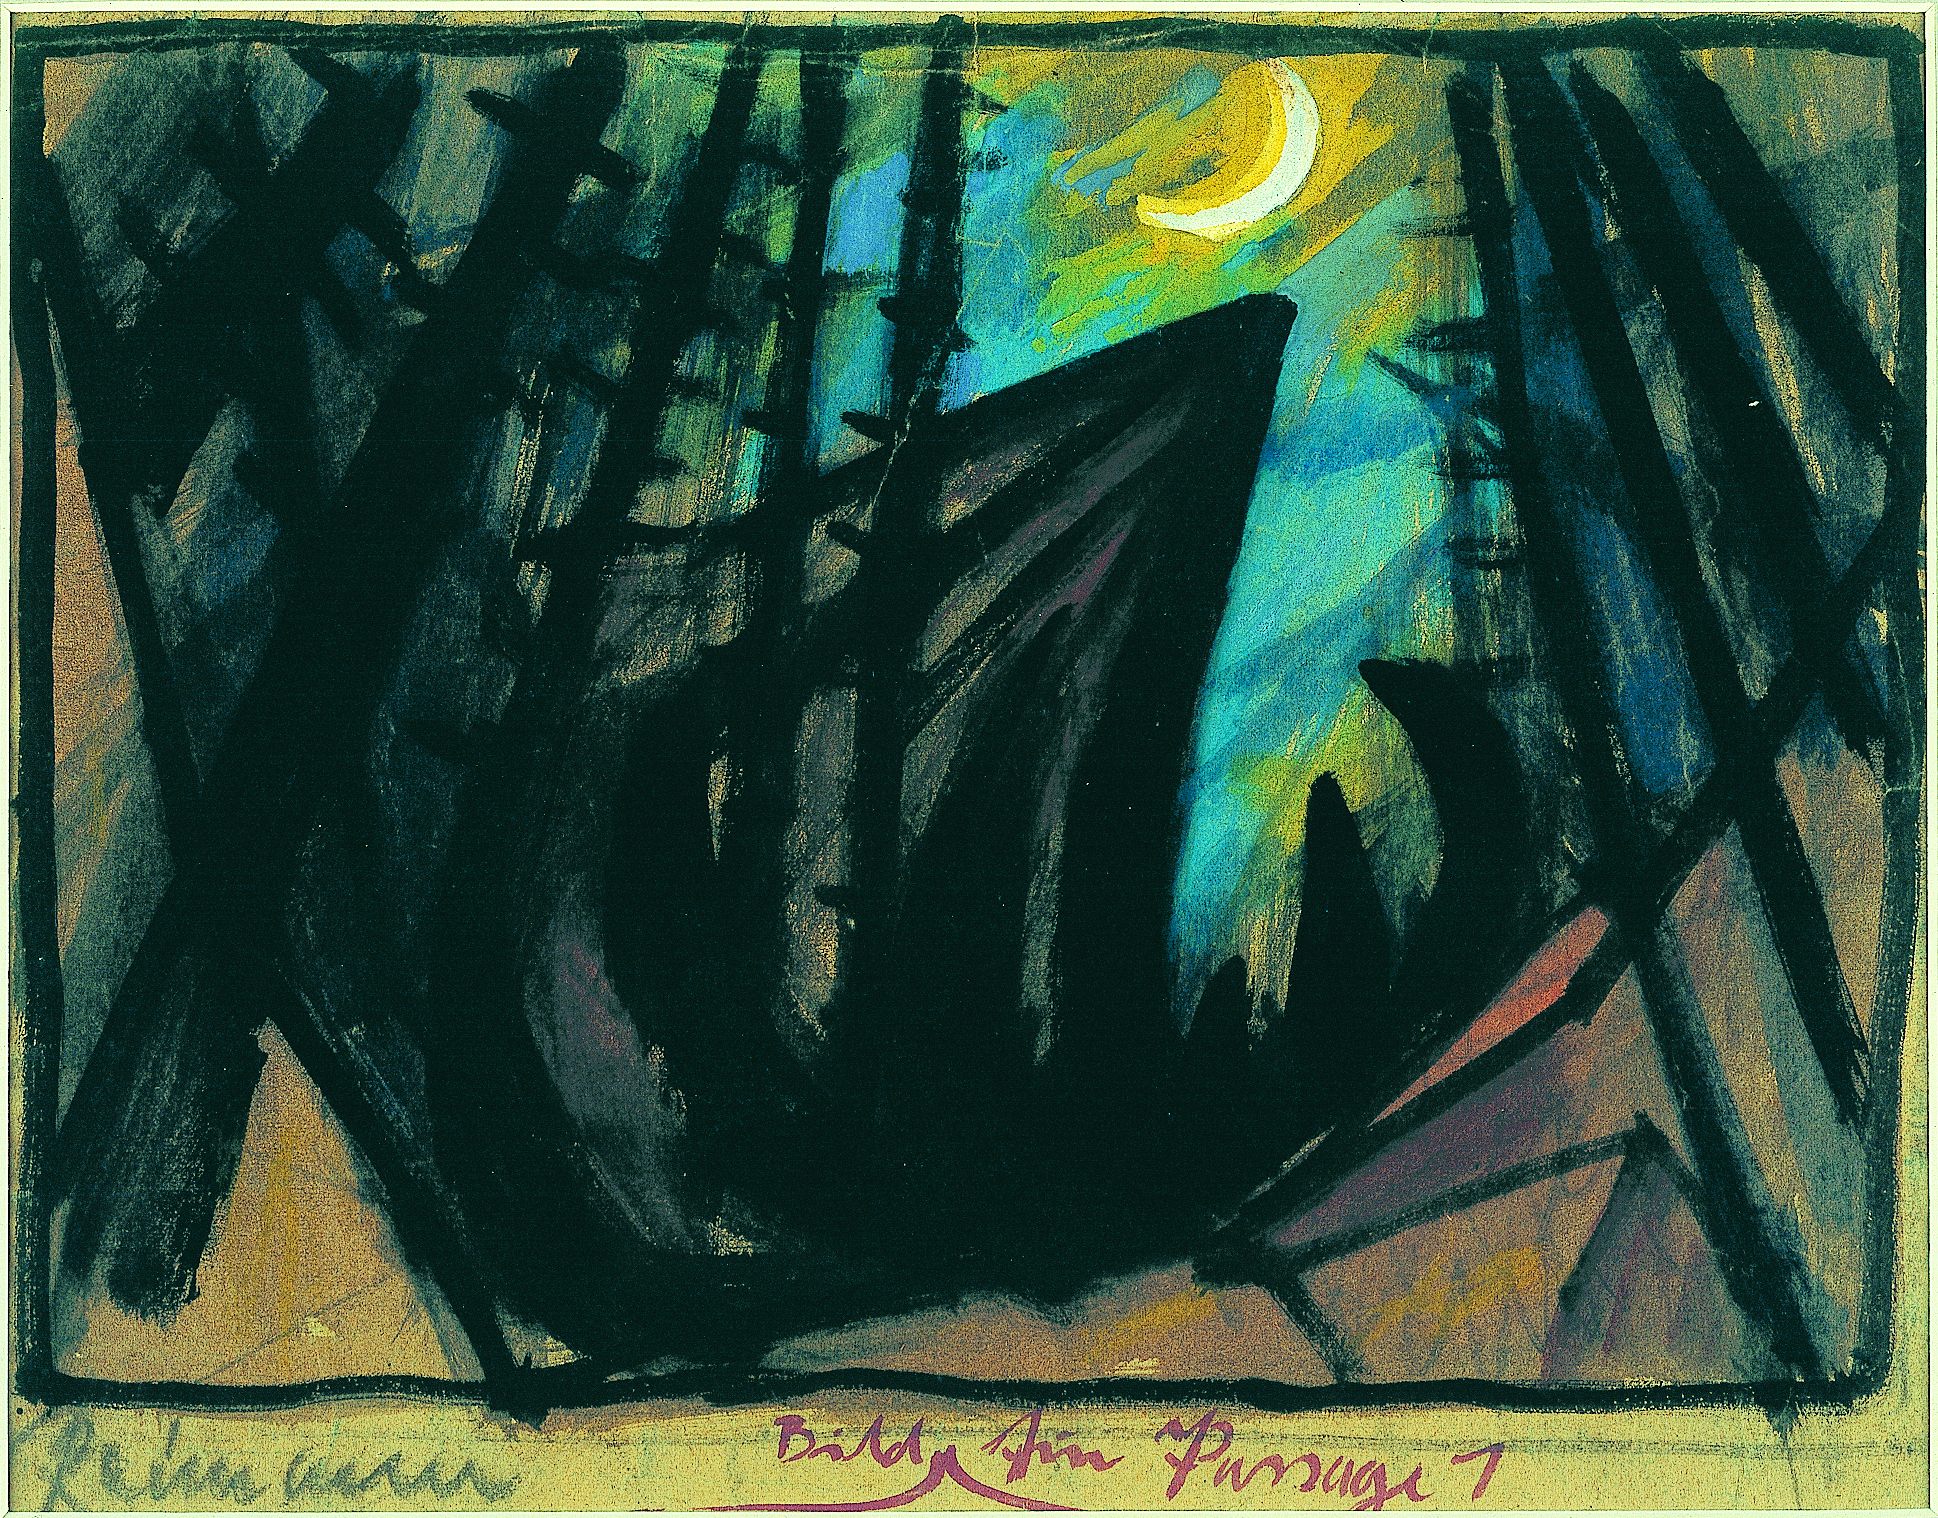 Drawing for the set design of Das Cabinet des Dr. Caligari 